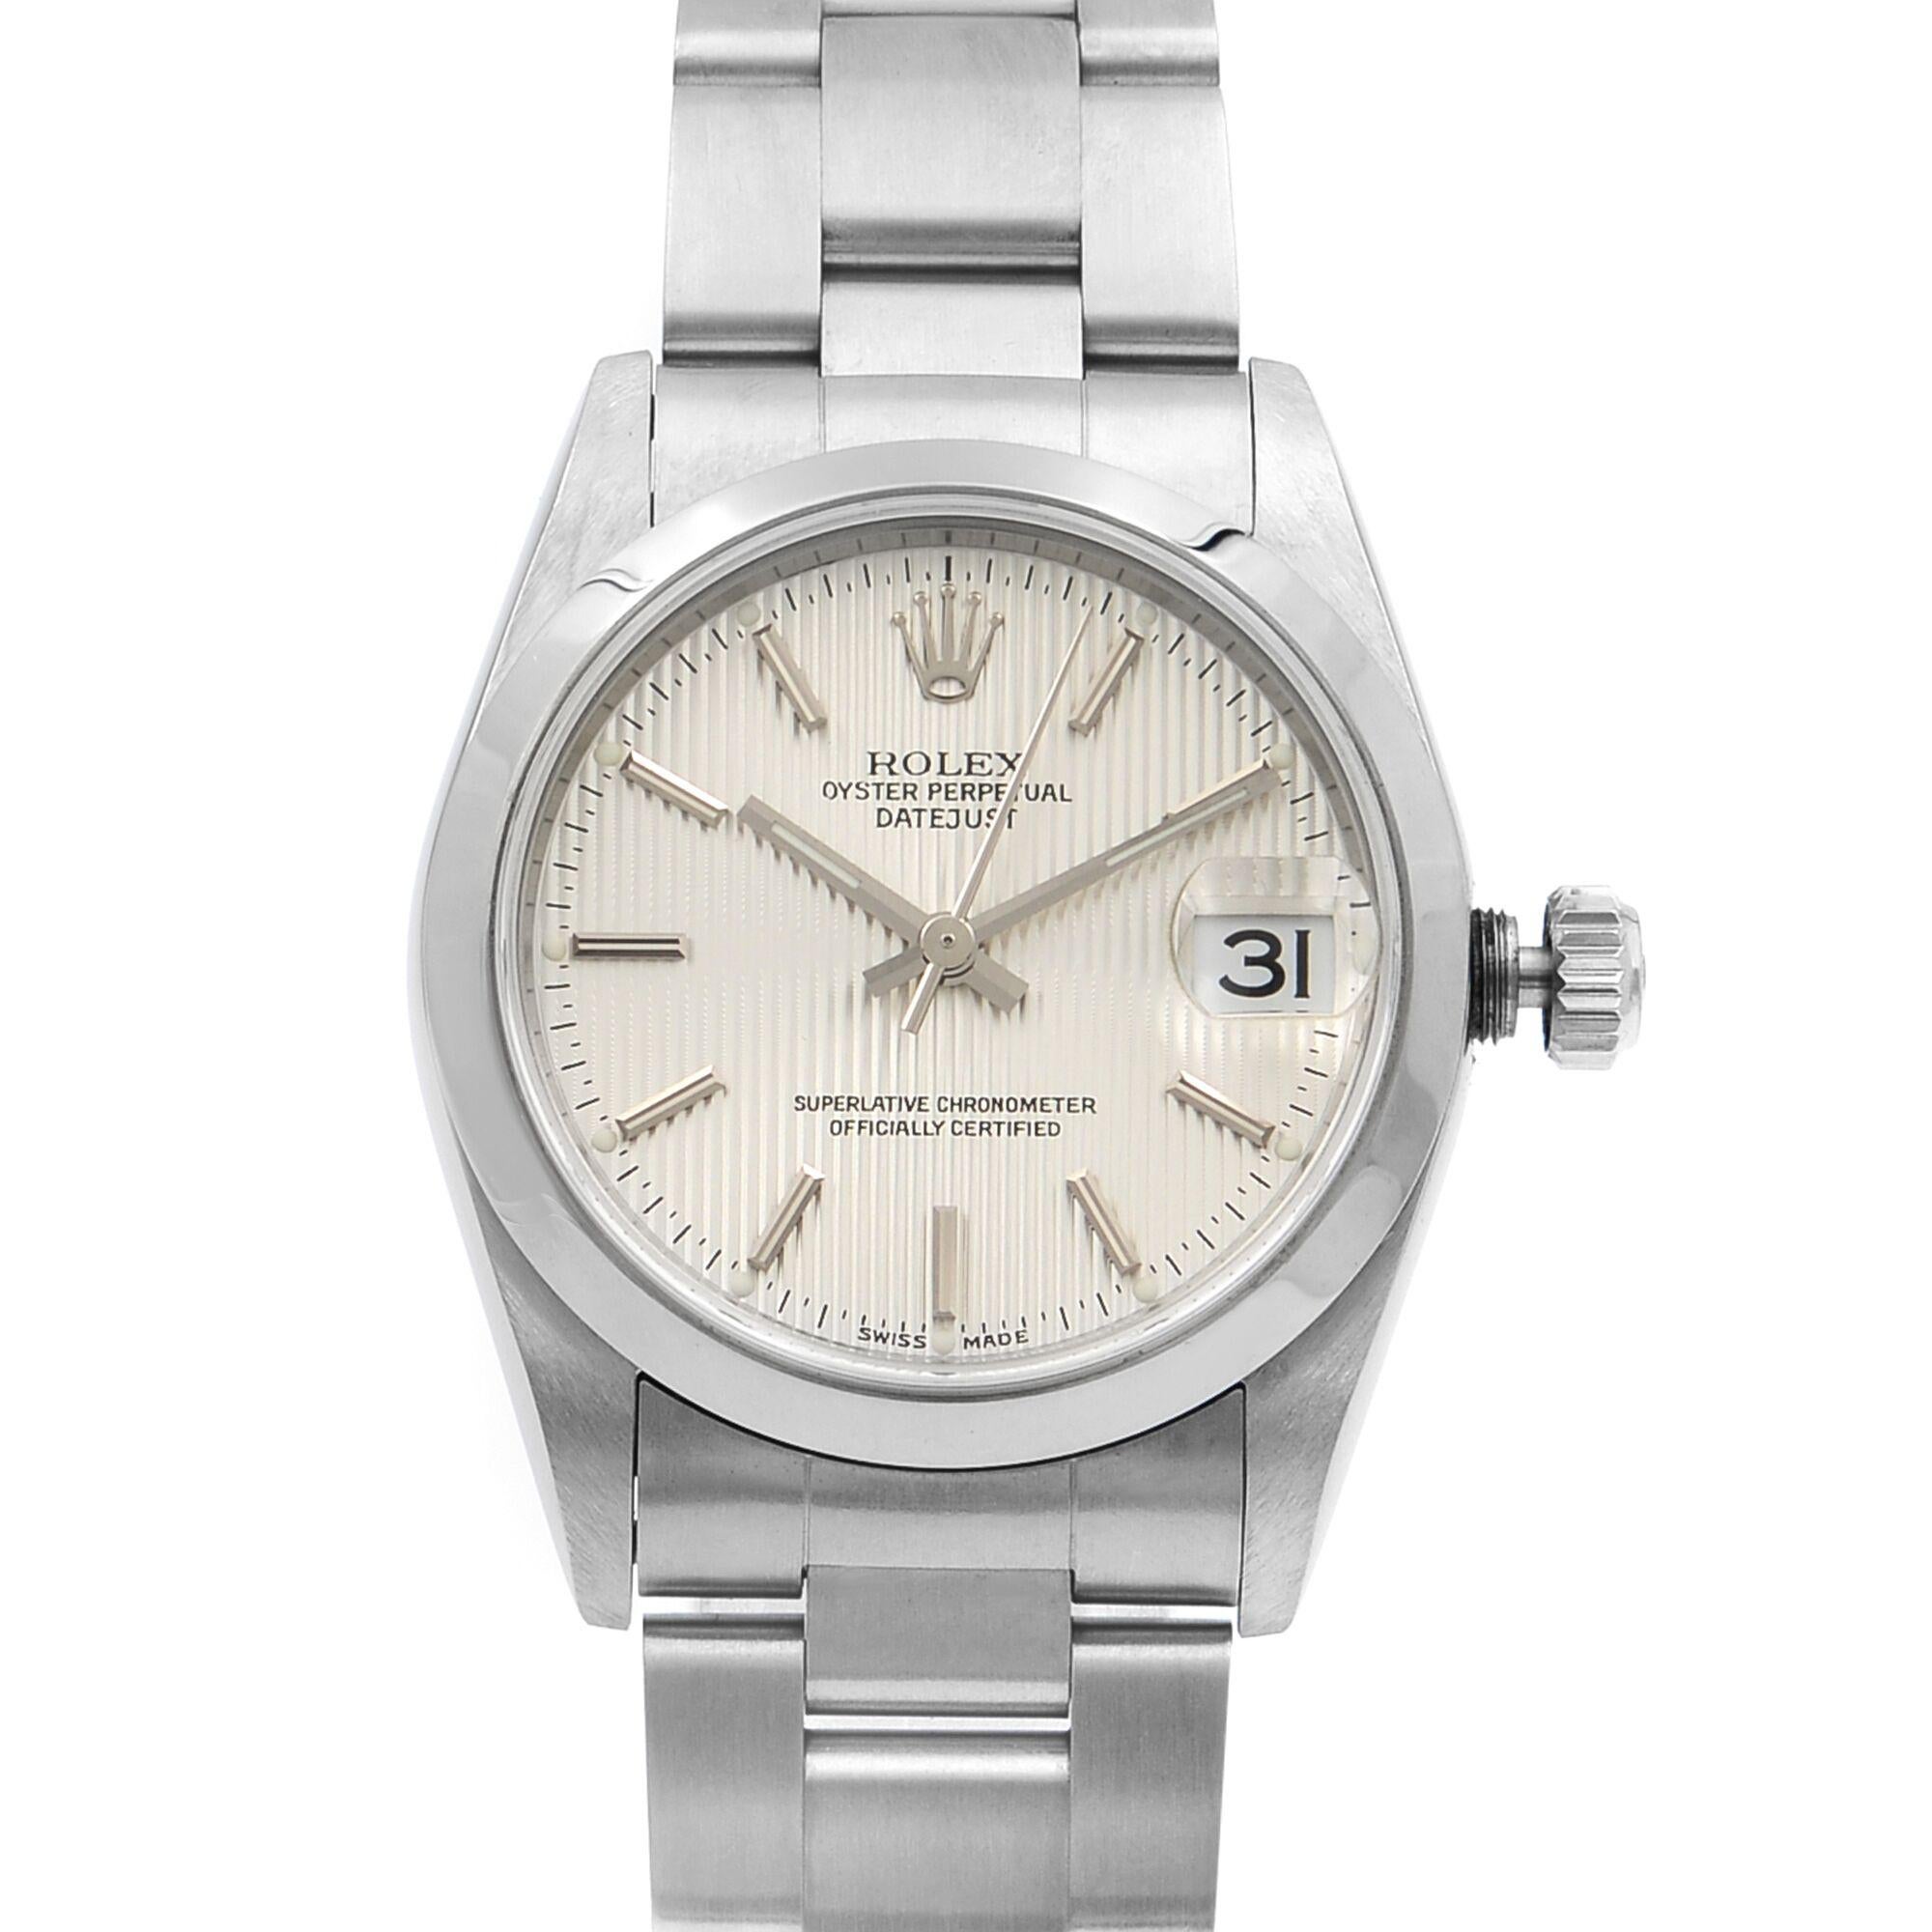 This pre-owned Rolex Datejust 78240 is a beautiful Ladie's timepiece that is powered by a mechanical (automatic) movement which is cased in a stainless steel case. It has a round shape face, date indicator dial, and has hand sticks style markers. It